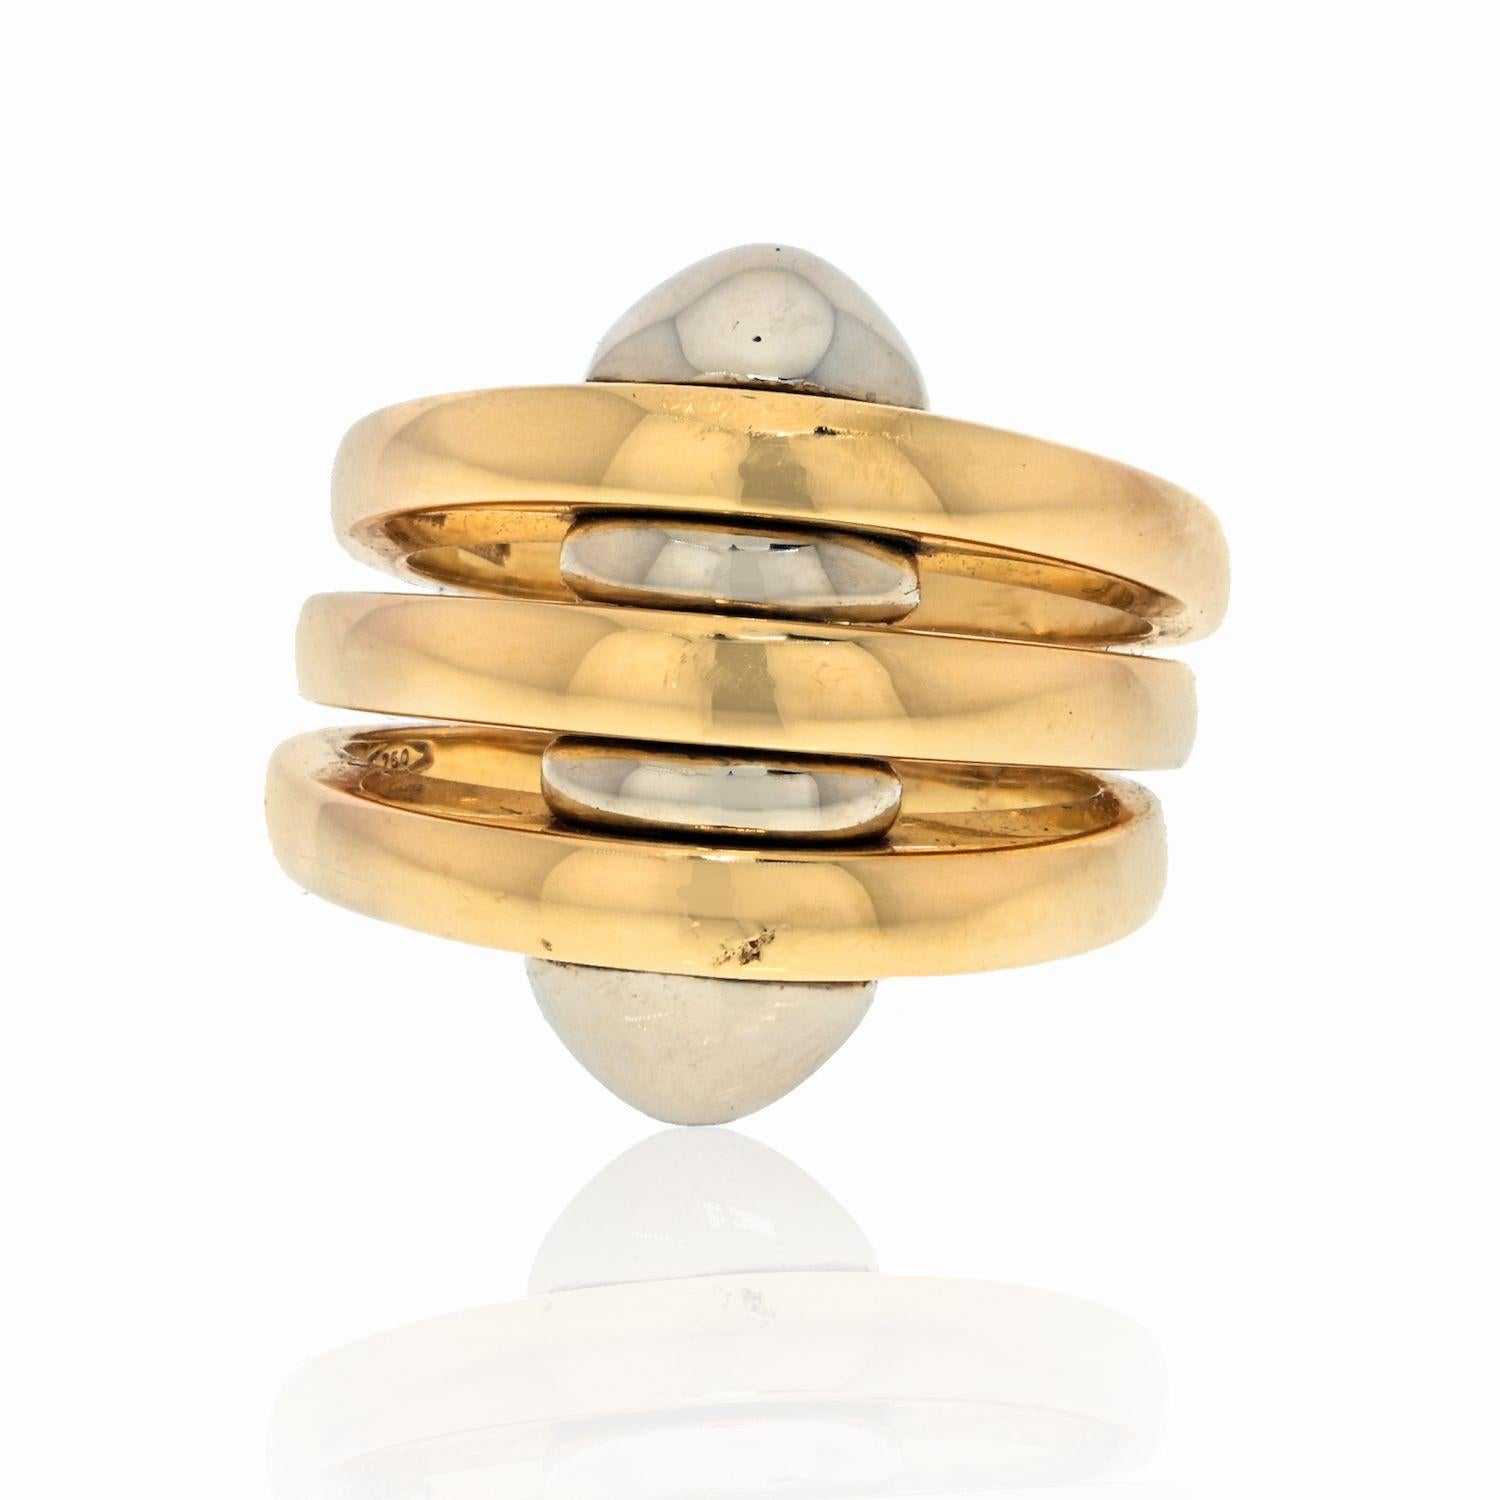 Bvlgari 18K Two Tone High Polished Tiered Ring.
Width: 6mm to 19mm
Ring face rises 7mm high from the finger
Each individual band measures 2mm to 3mm wide.